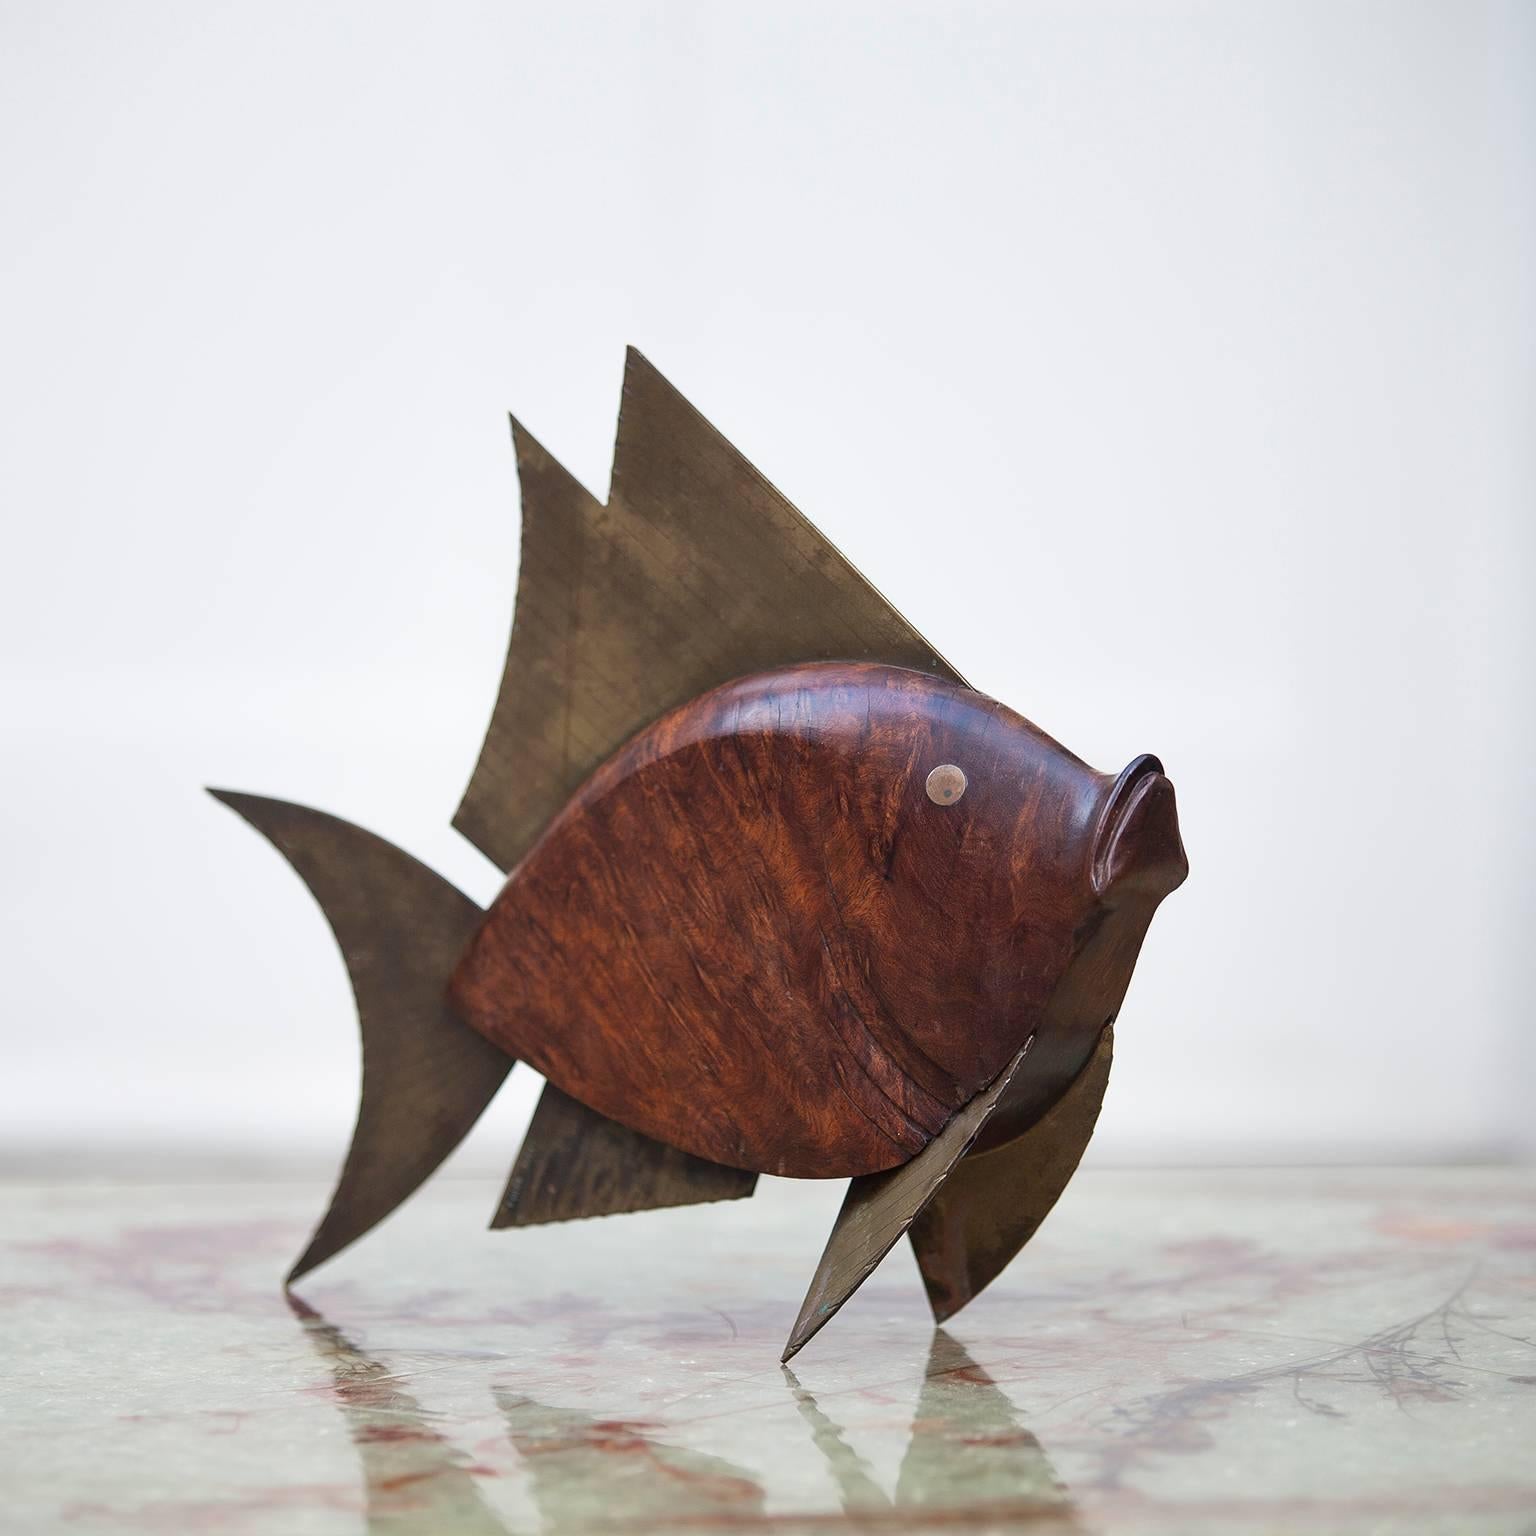 Wonderful and rare Jacques Adnet fish sculpture in burl wood and brass, signed Adnet Paris, France, 1950s.

Measures: H 27 x B 33 x D 7 cm.